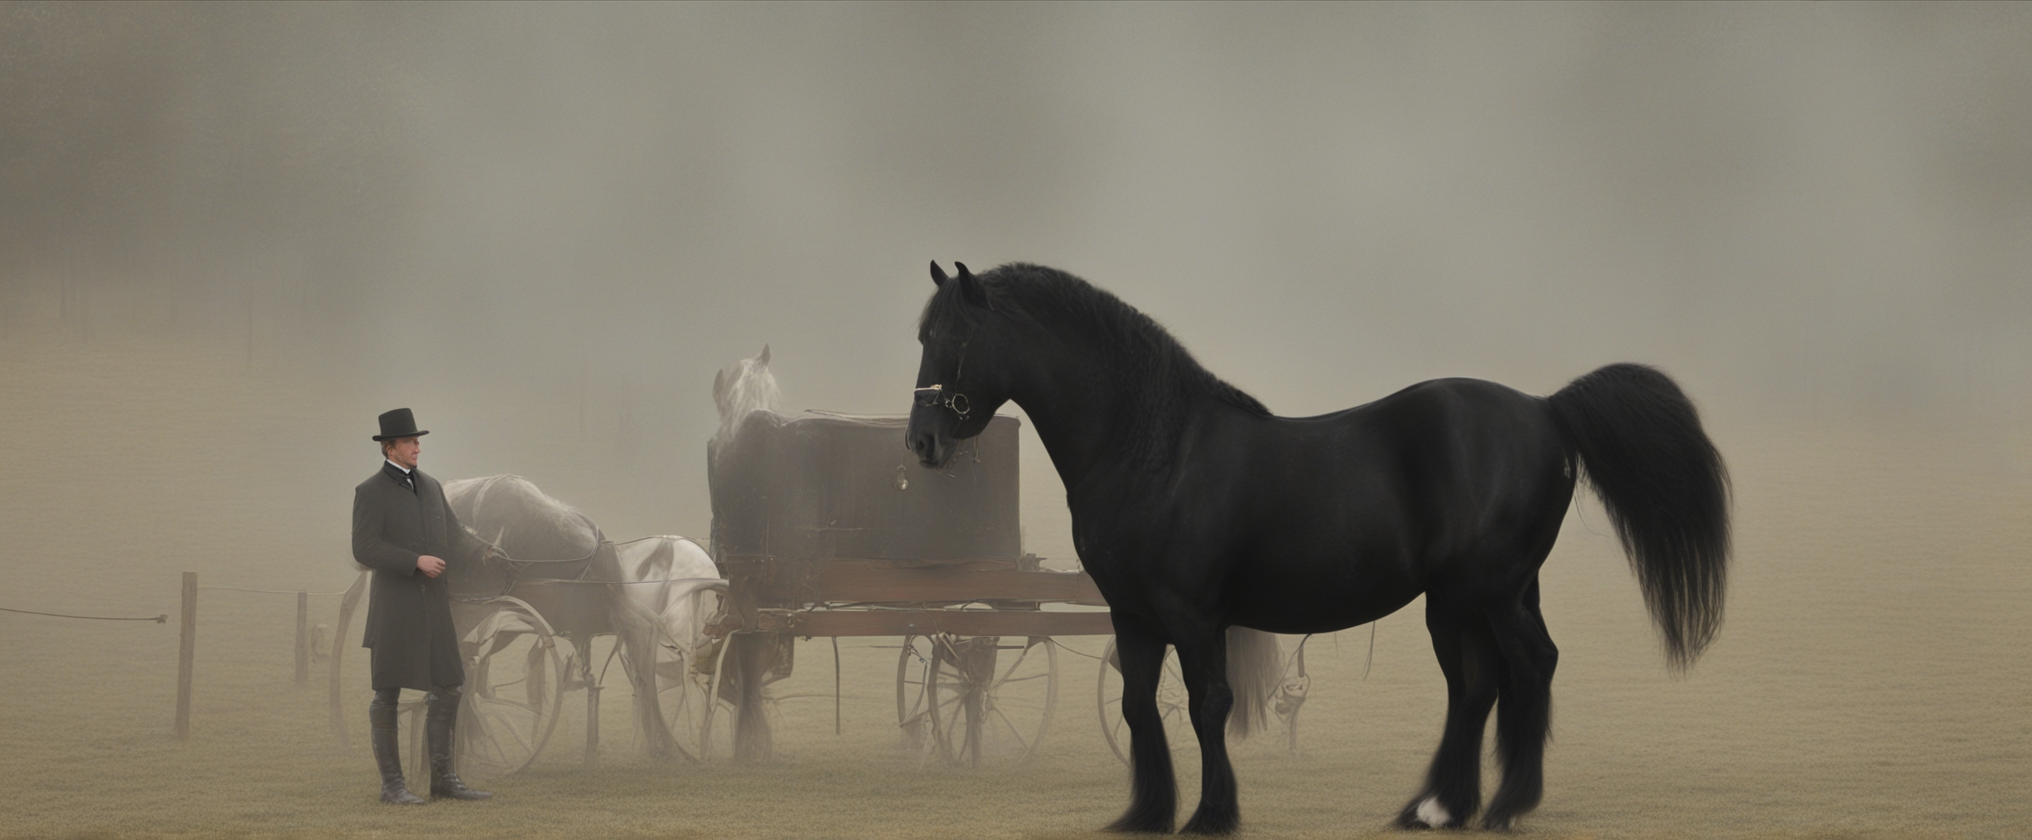 friesian-vs-clydesdale